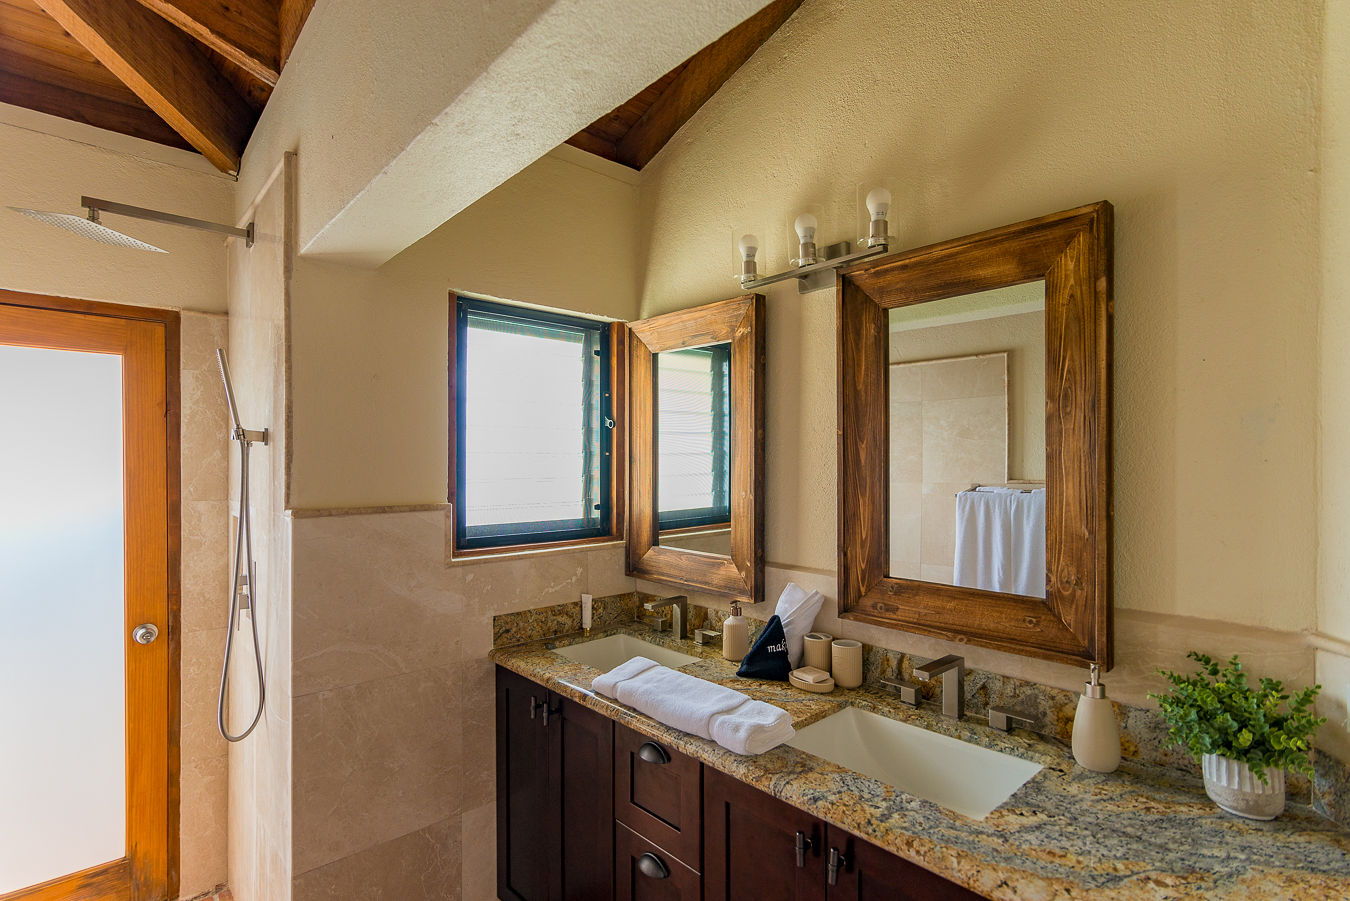 Amani Villa’s master bathroom with a granite-counter double vanity, tile and natural stone walls and a shower.